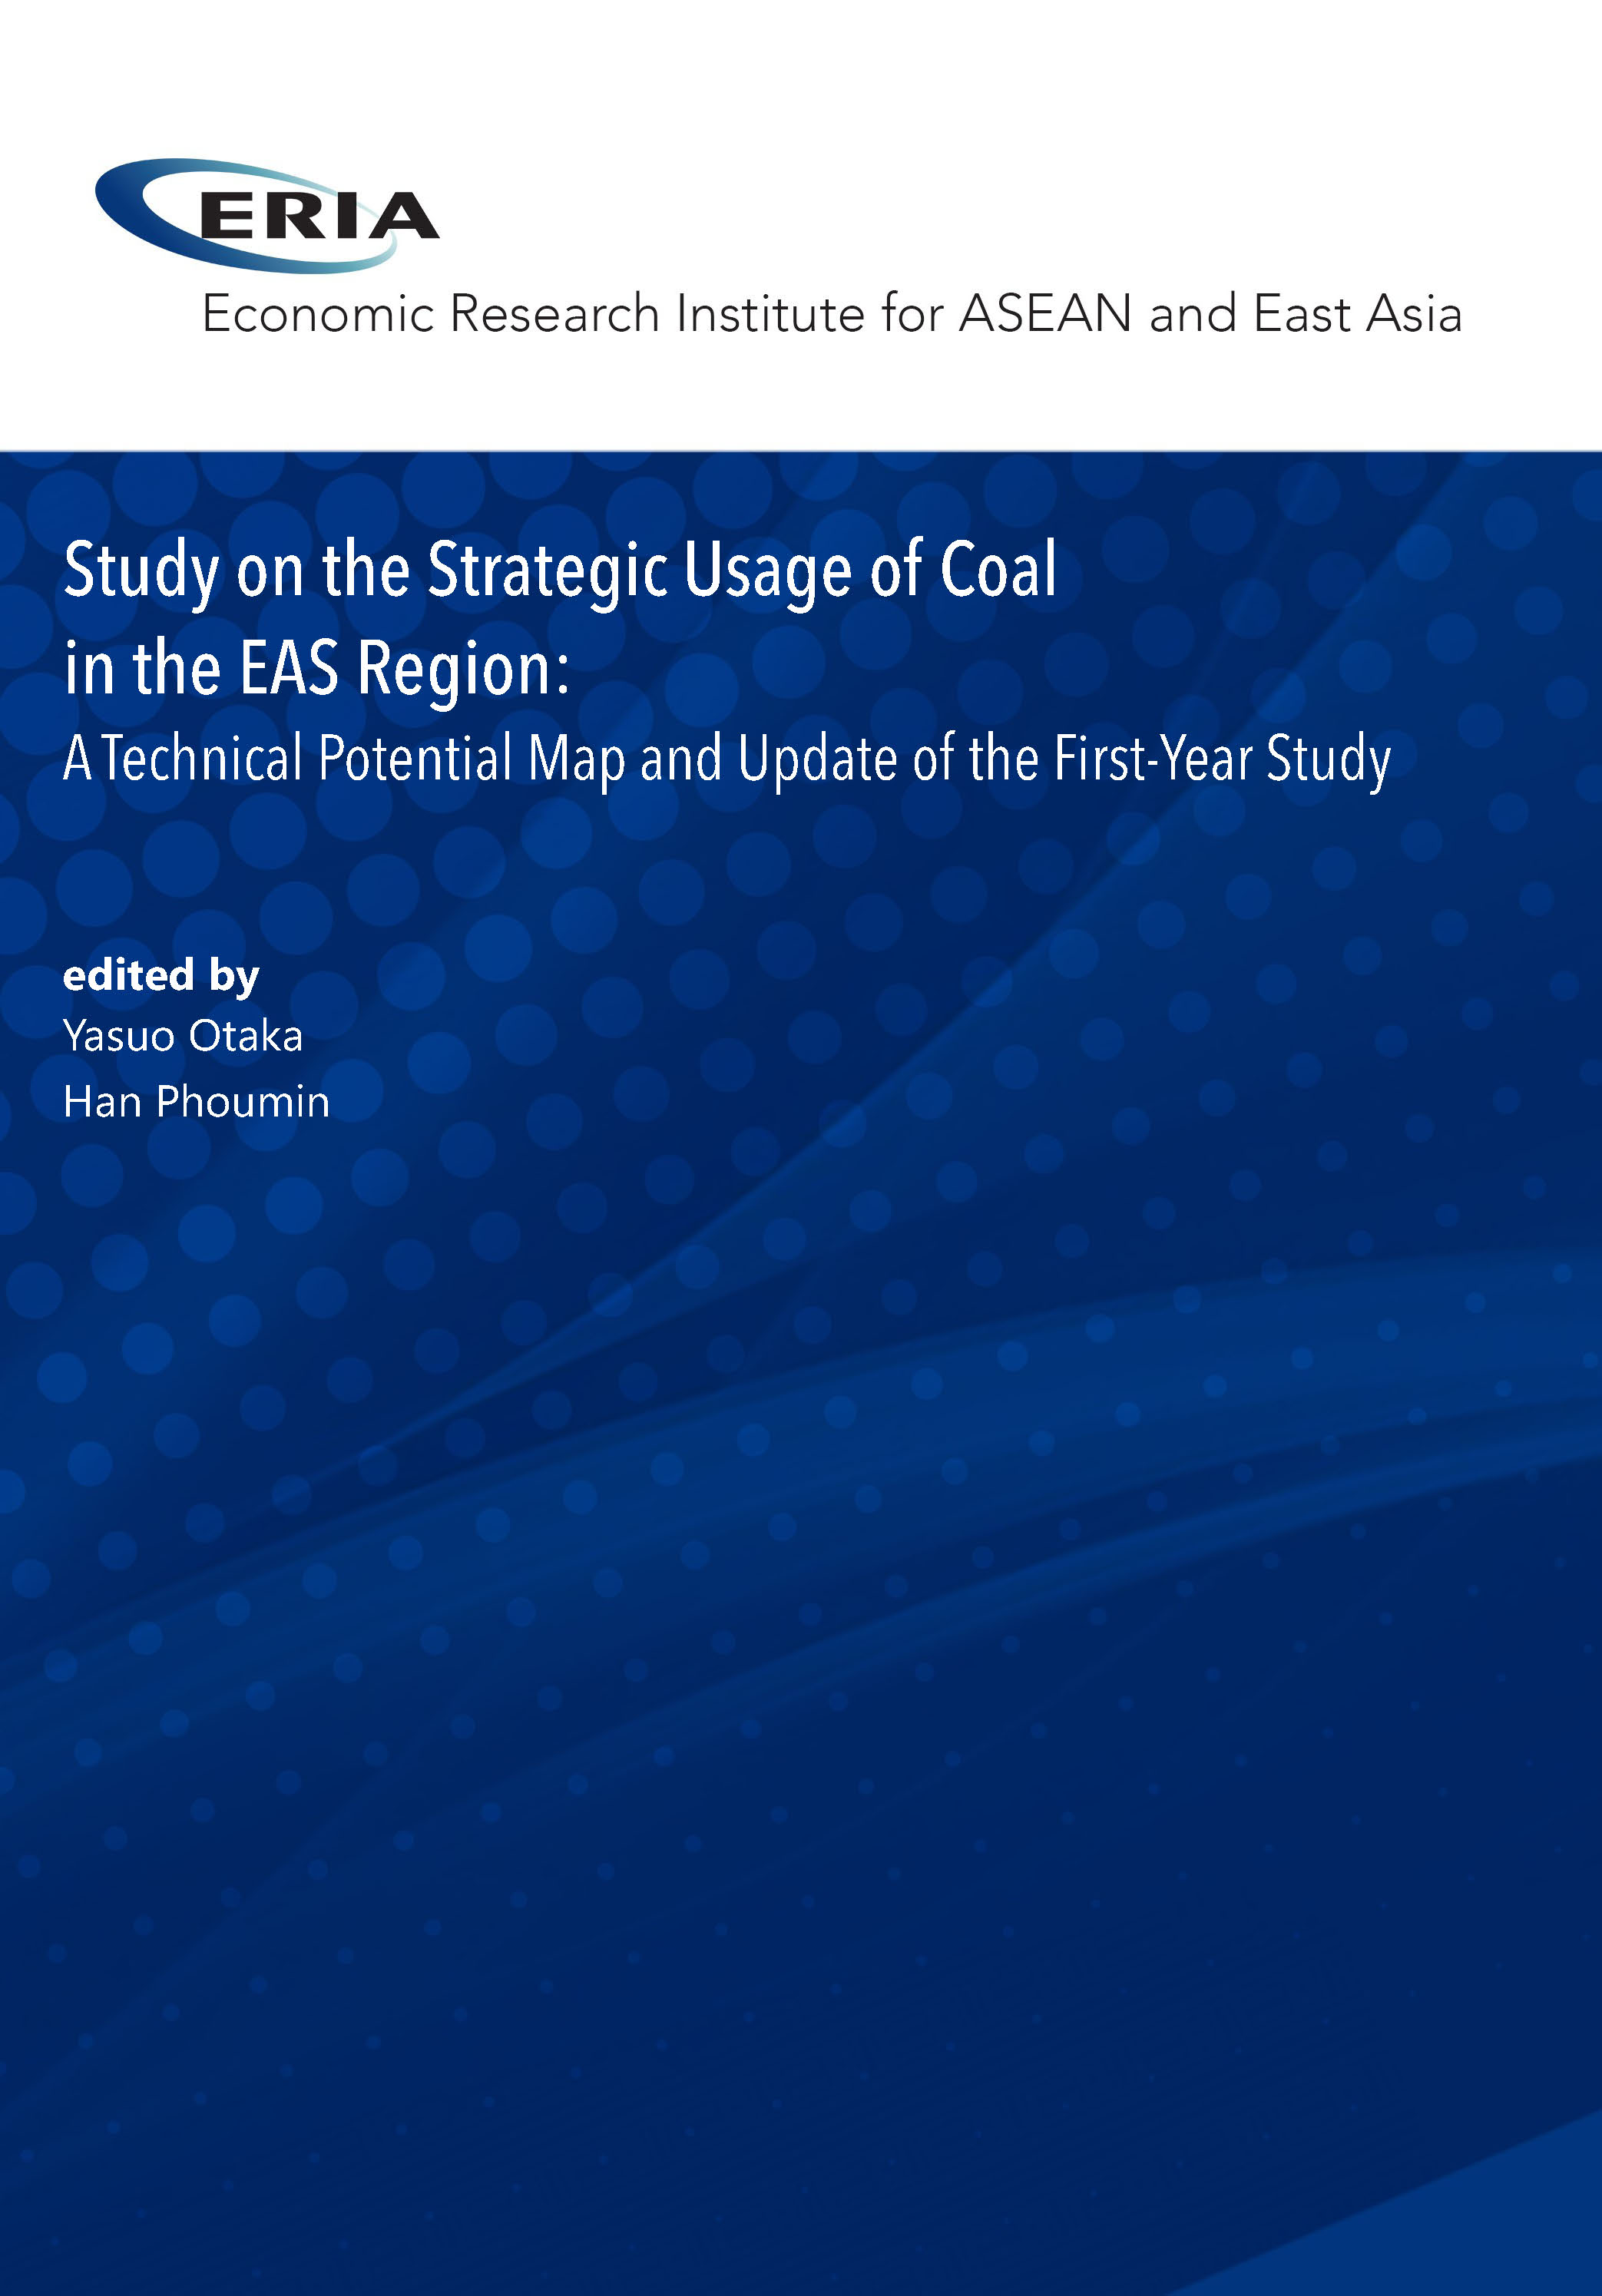 Study on the Strategic Usage of Coal in the EAS Region: A Technical Potential Map and Update of the First-Year Study